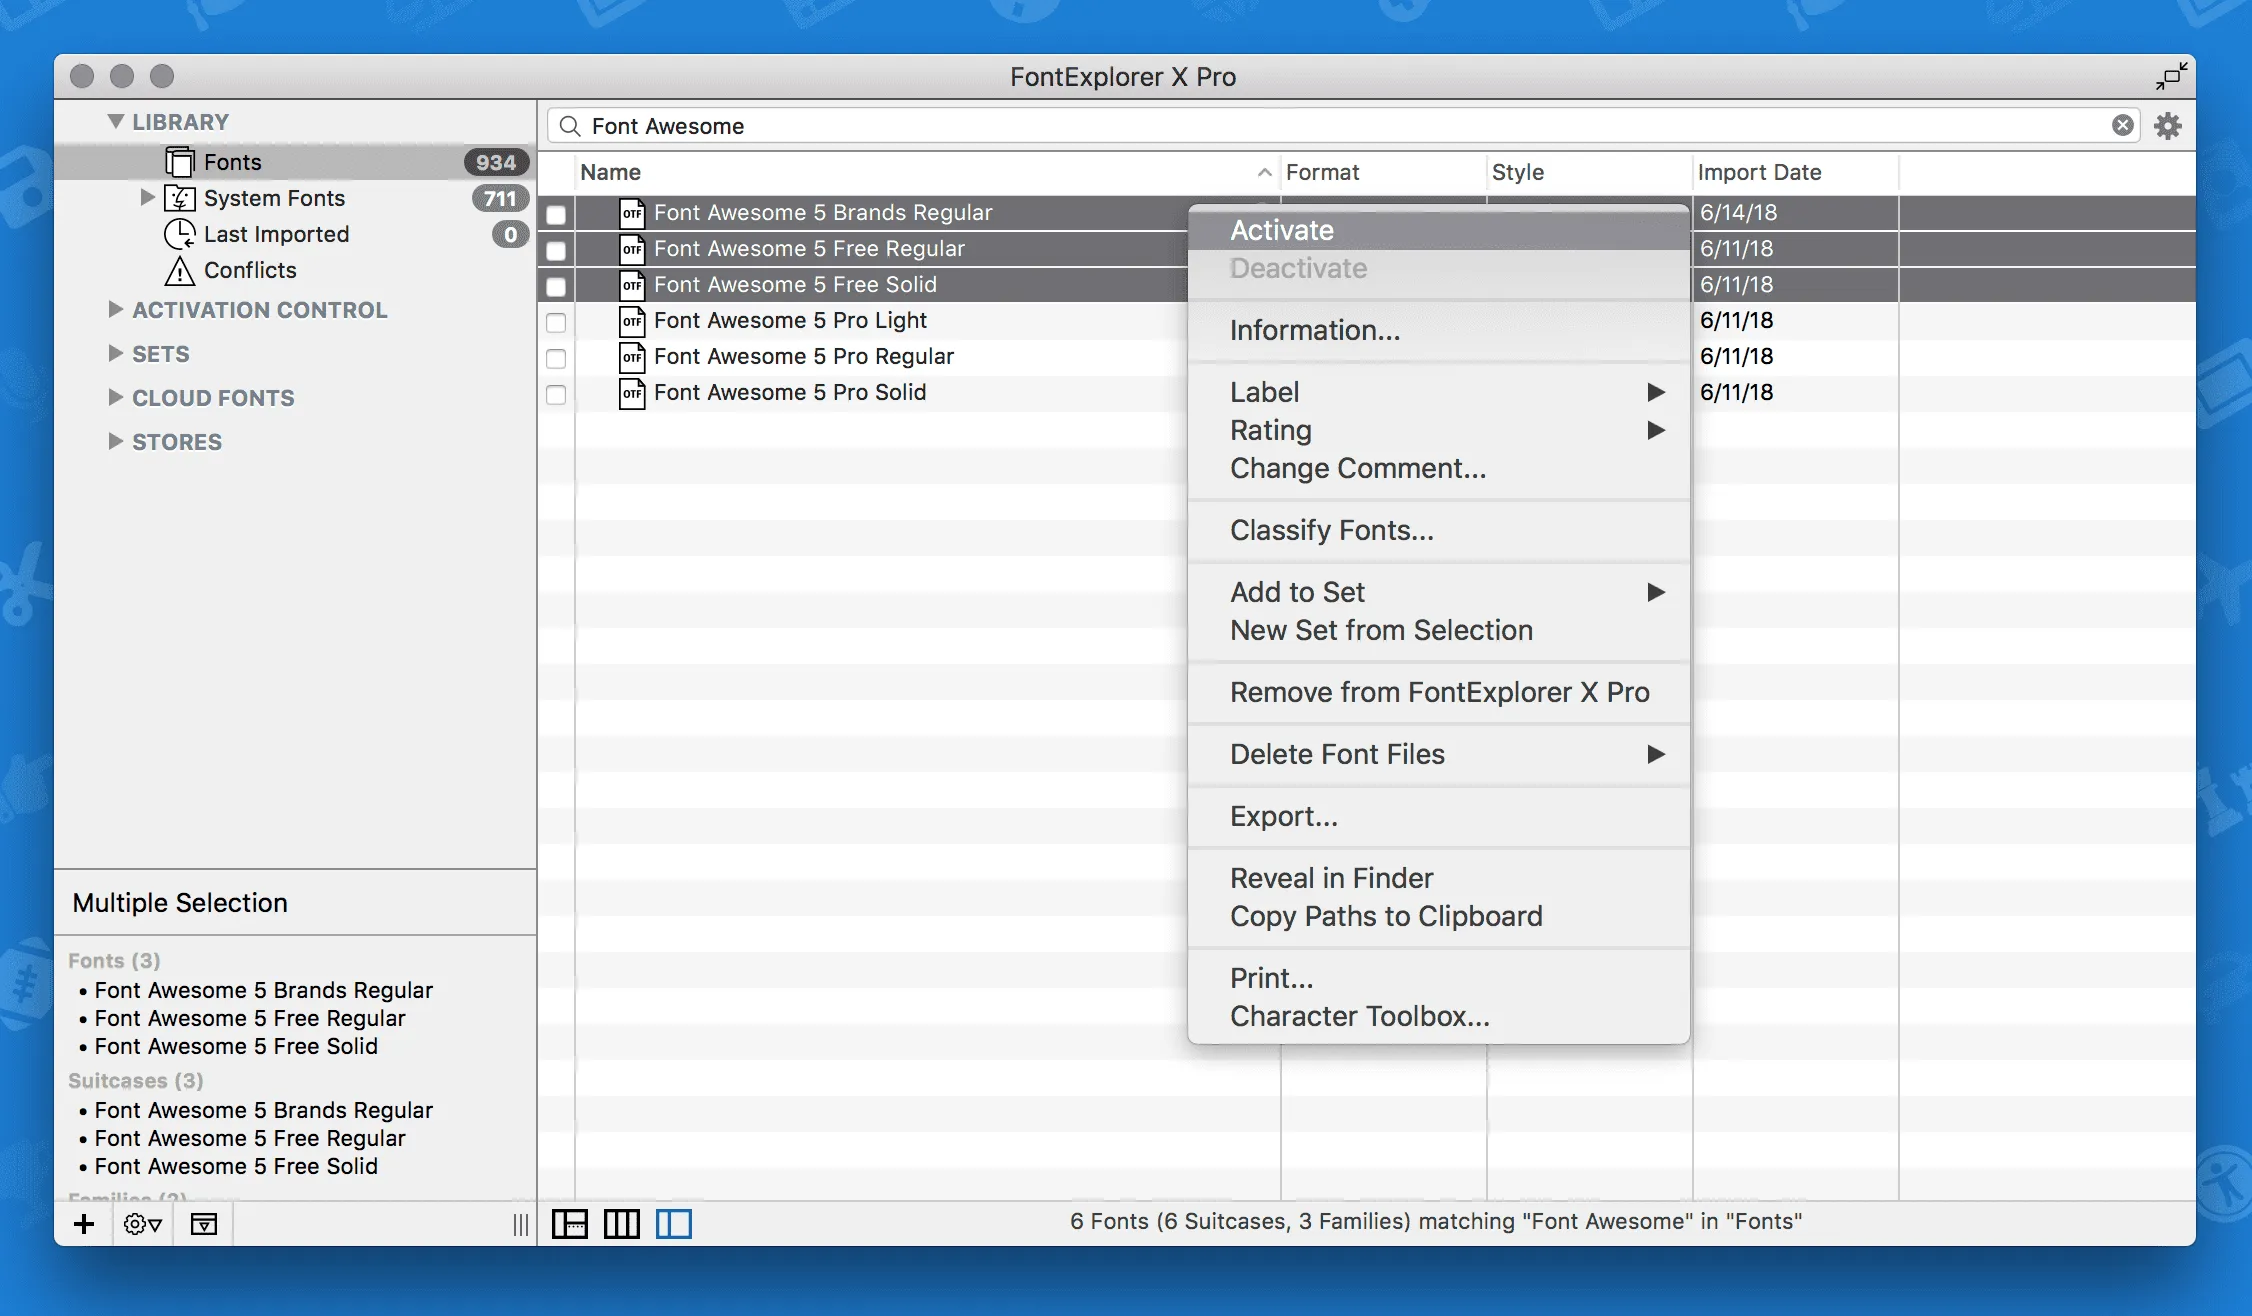 Font Awesome 5 Free installed and being activated in Font Explorer X on Mac OS X